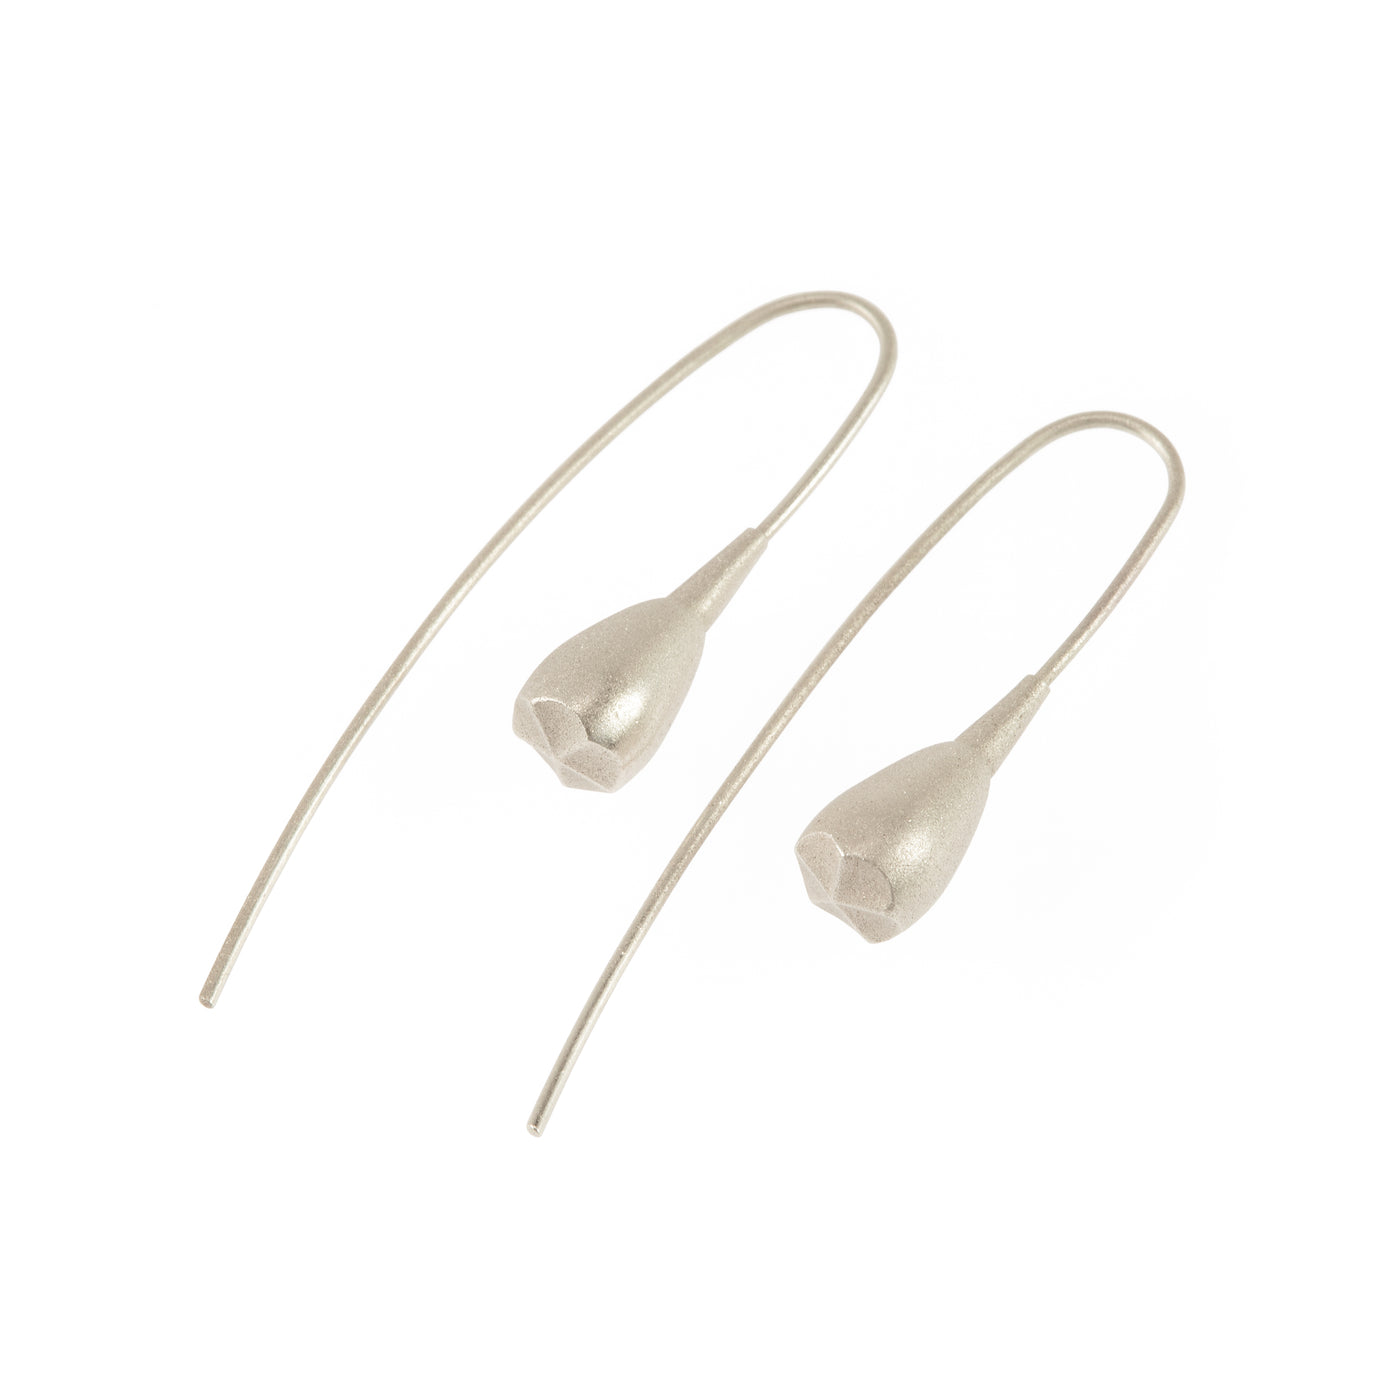 Ethical silver earrings. These minimalist Pod Earrings are handmade in Cape Town in recycled silver from e-waste.